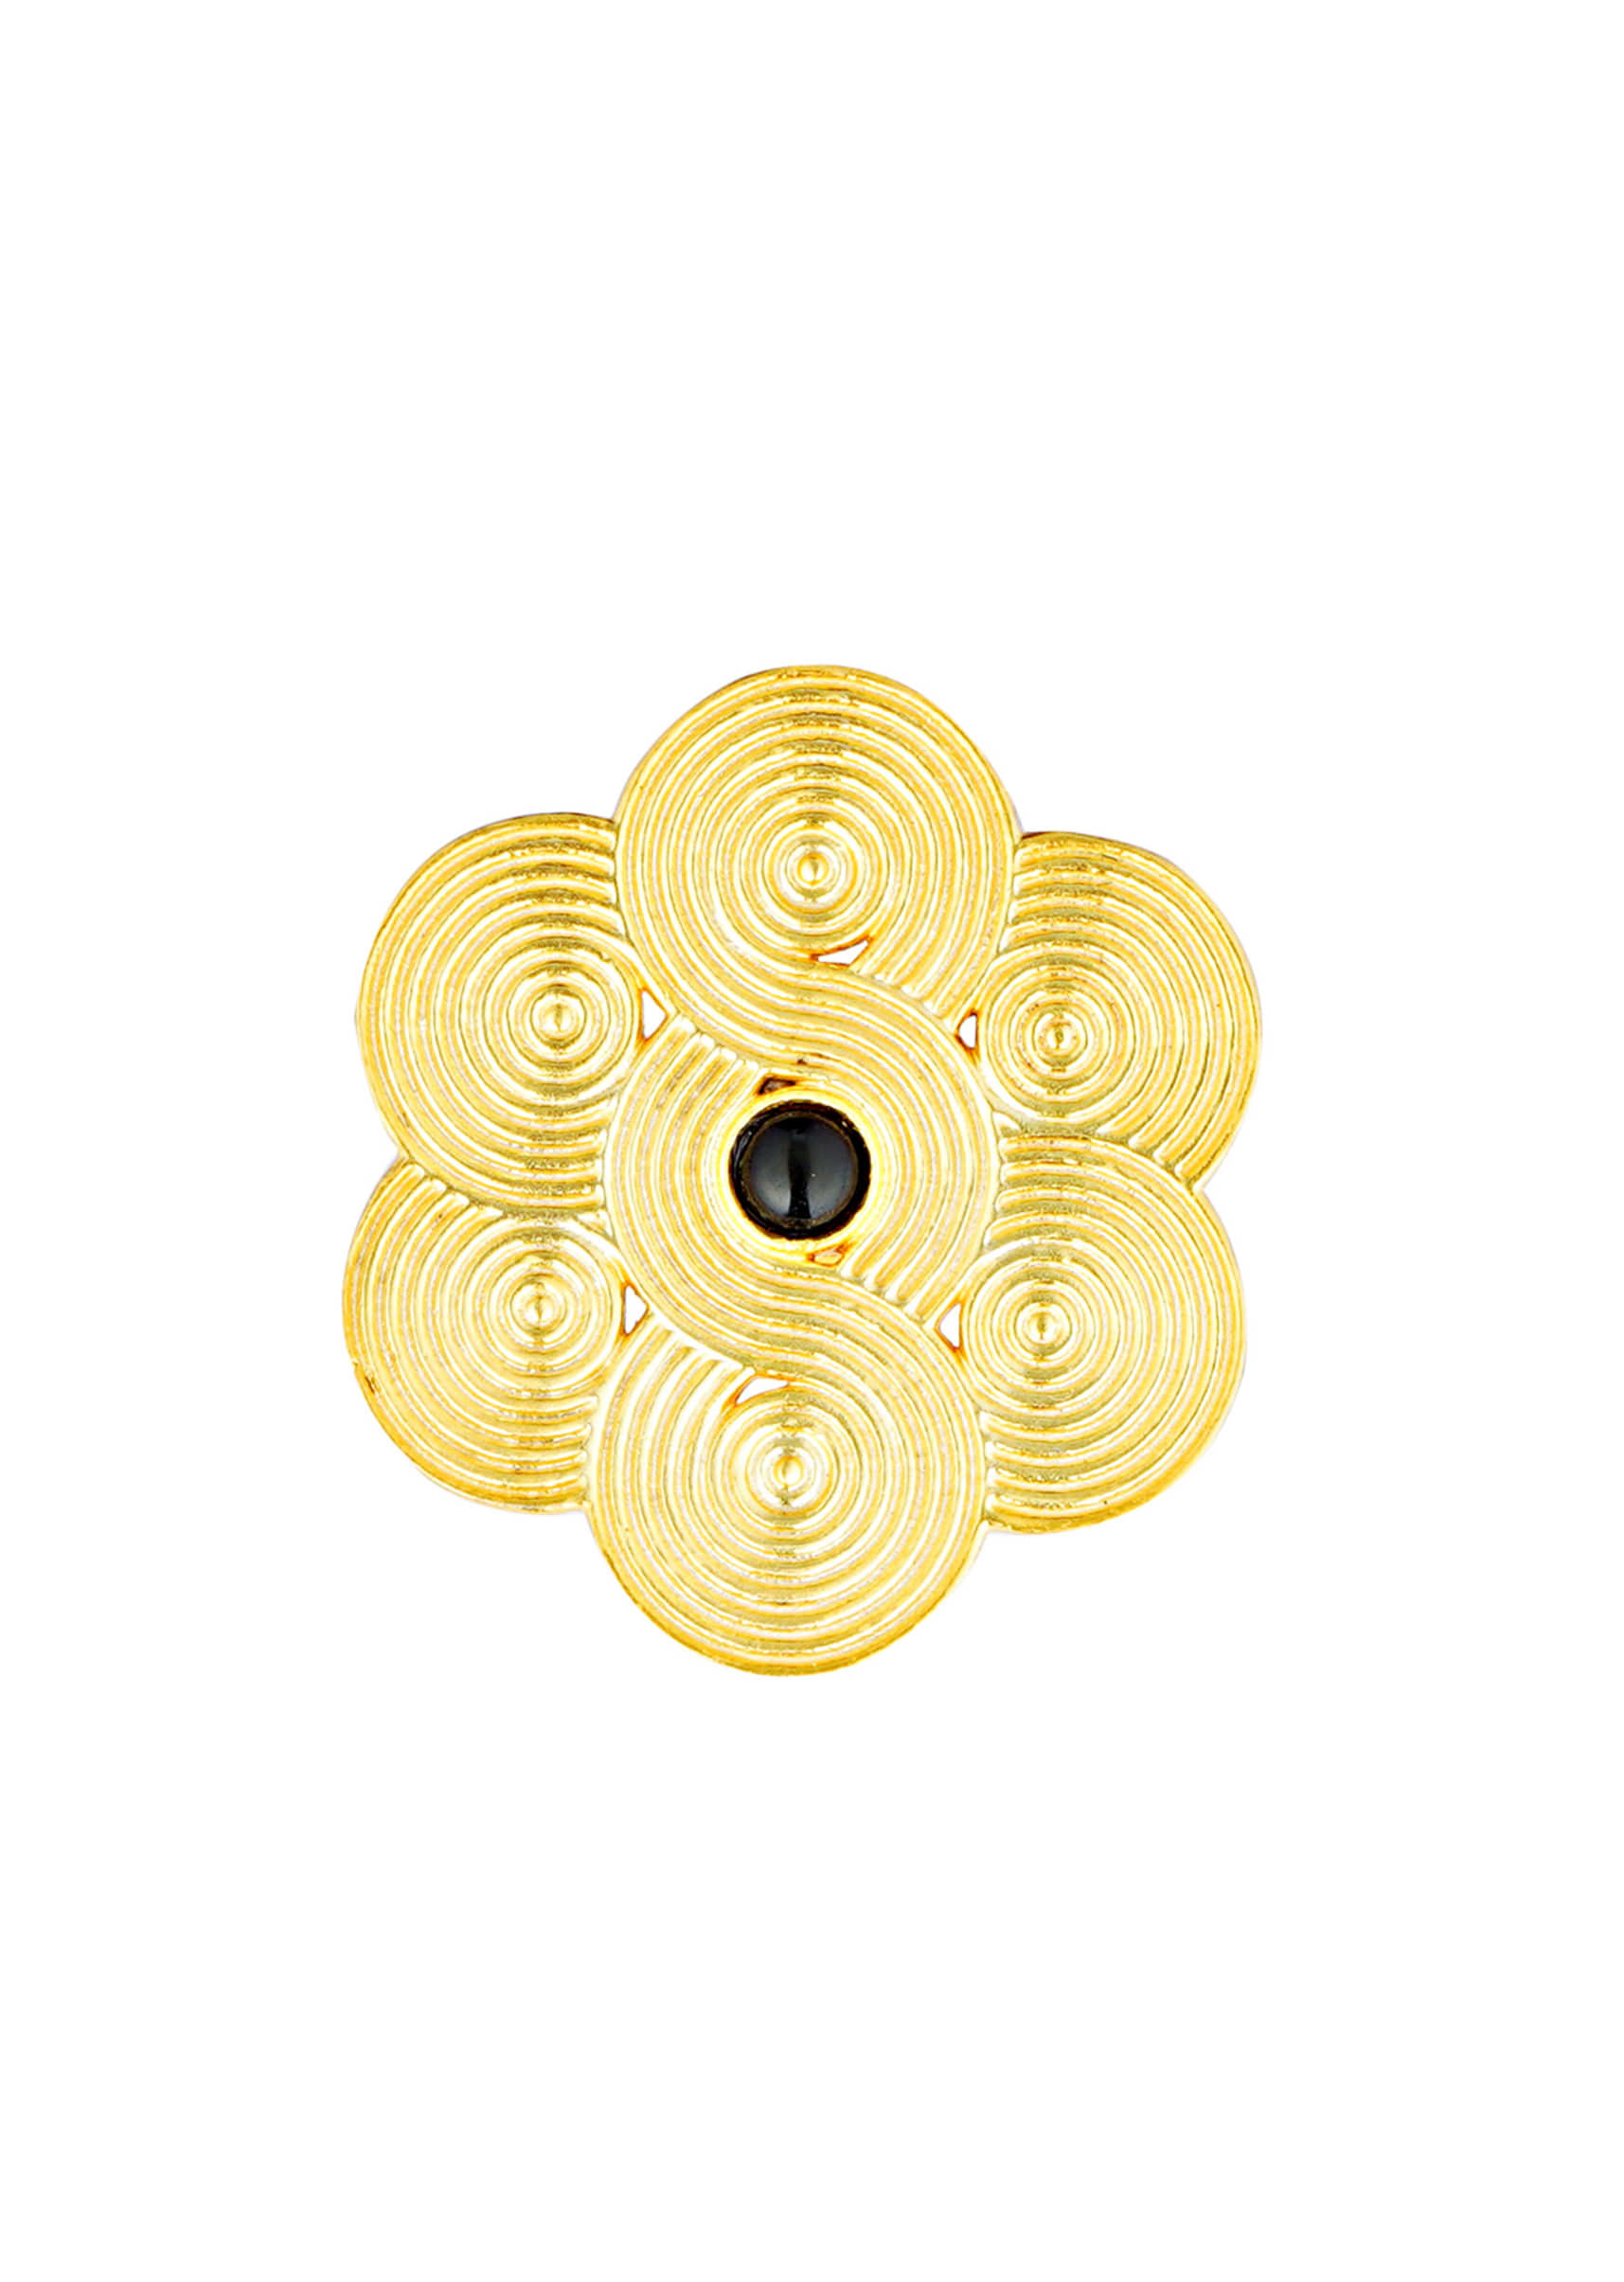 Gold Plated Adjustable Ring In Floral Design Studded With Onyx Stones